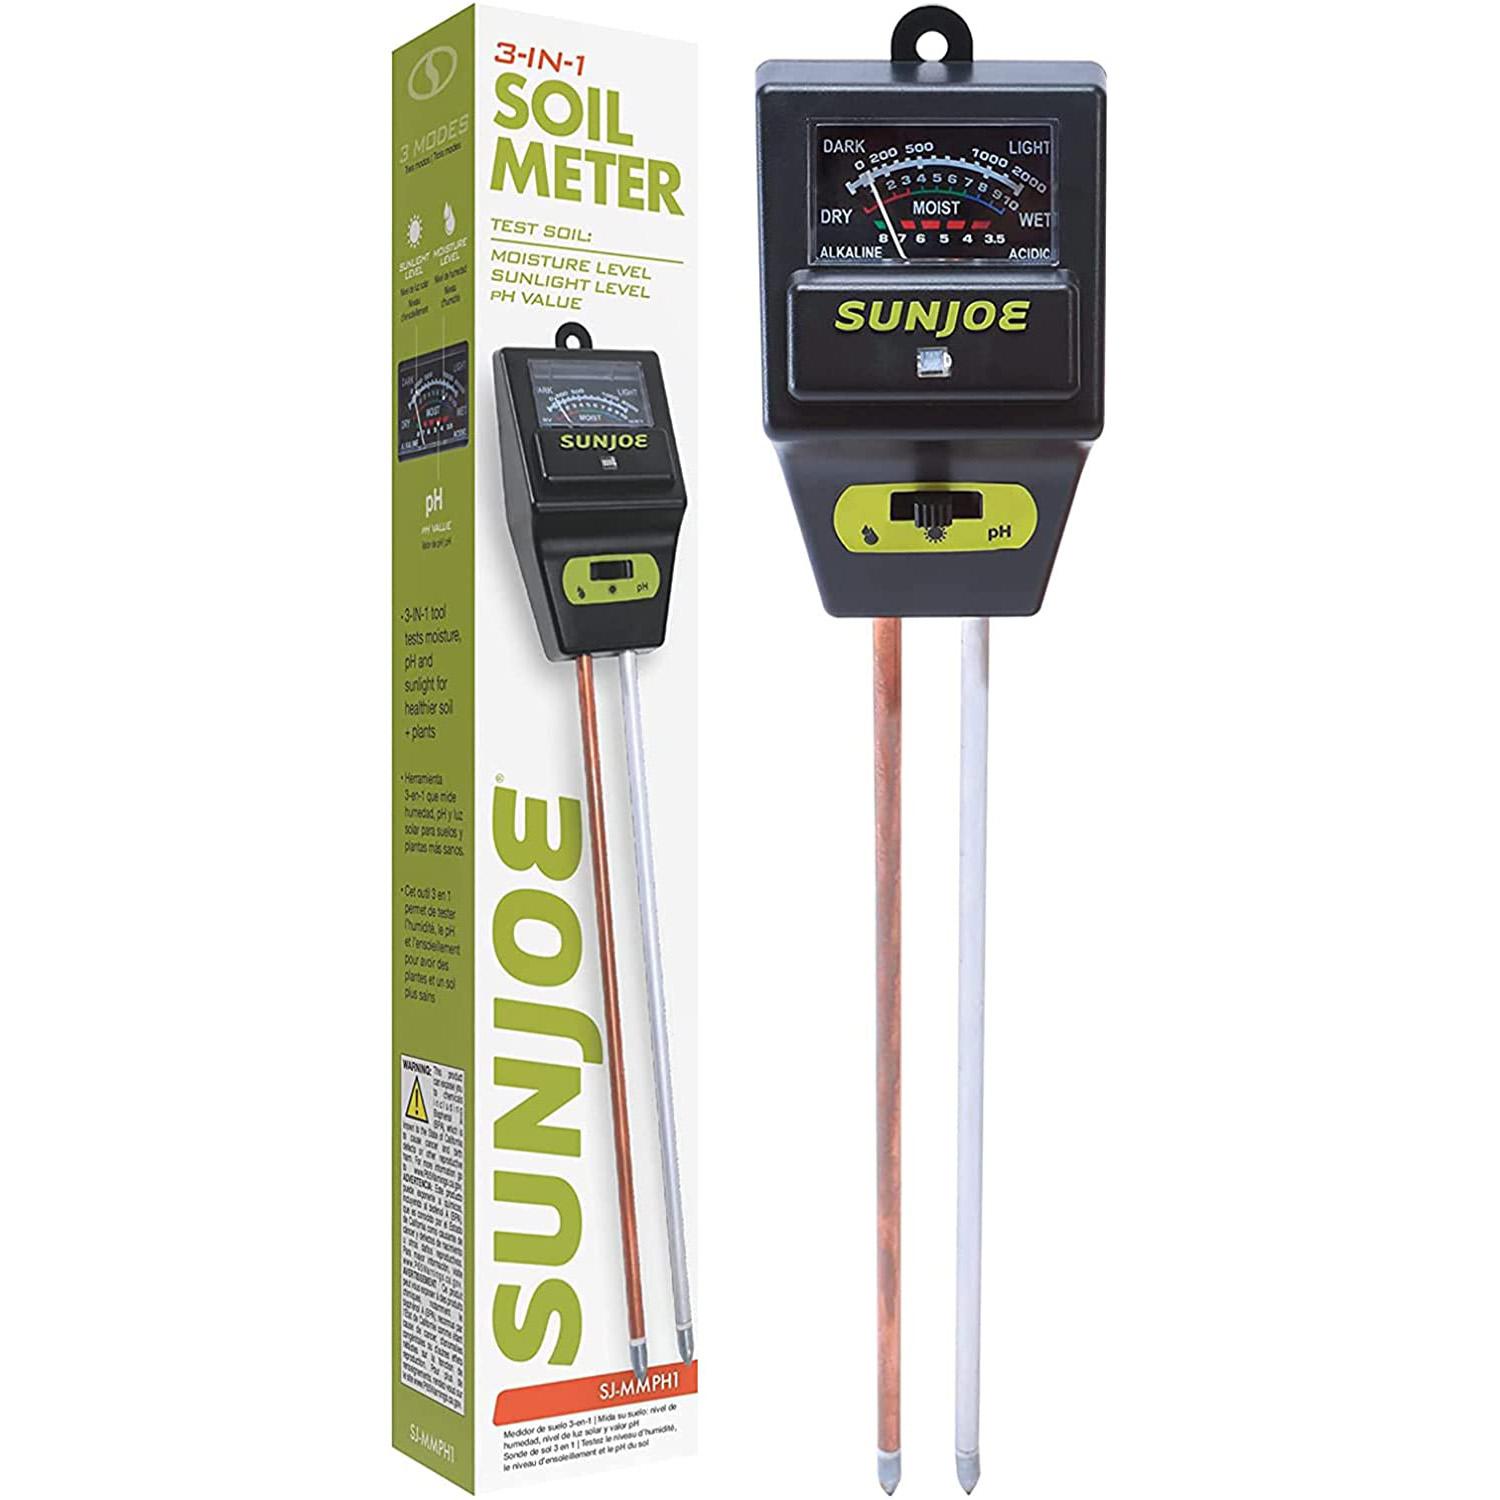  Sun Joe 3-in-1 Soil with Moisture and Light Meter for $6.99